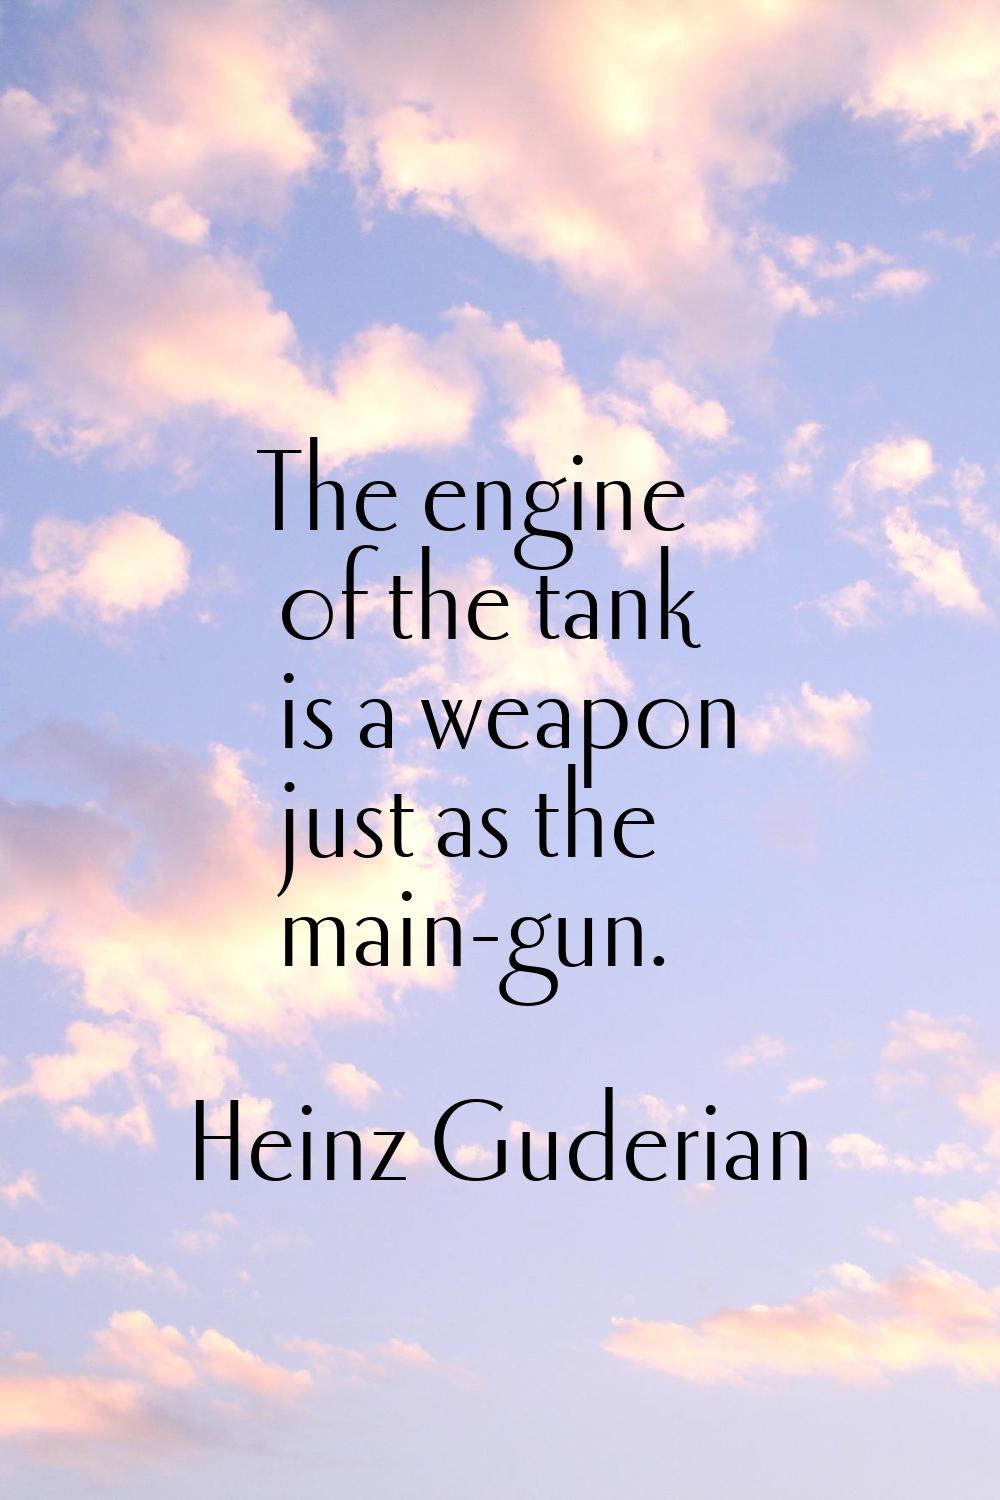 The engine of the tank is a weapon just as the main-gun.